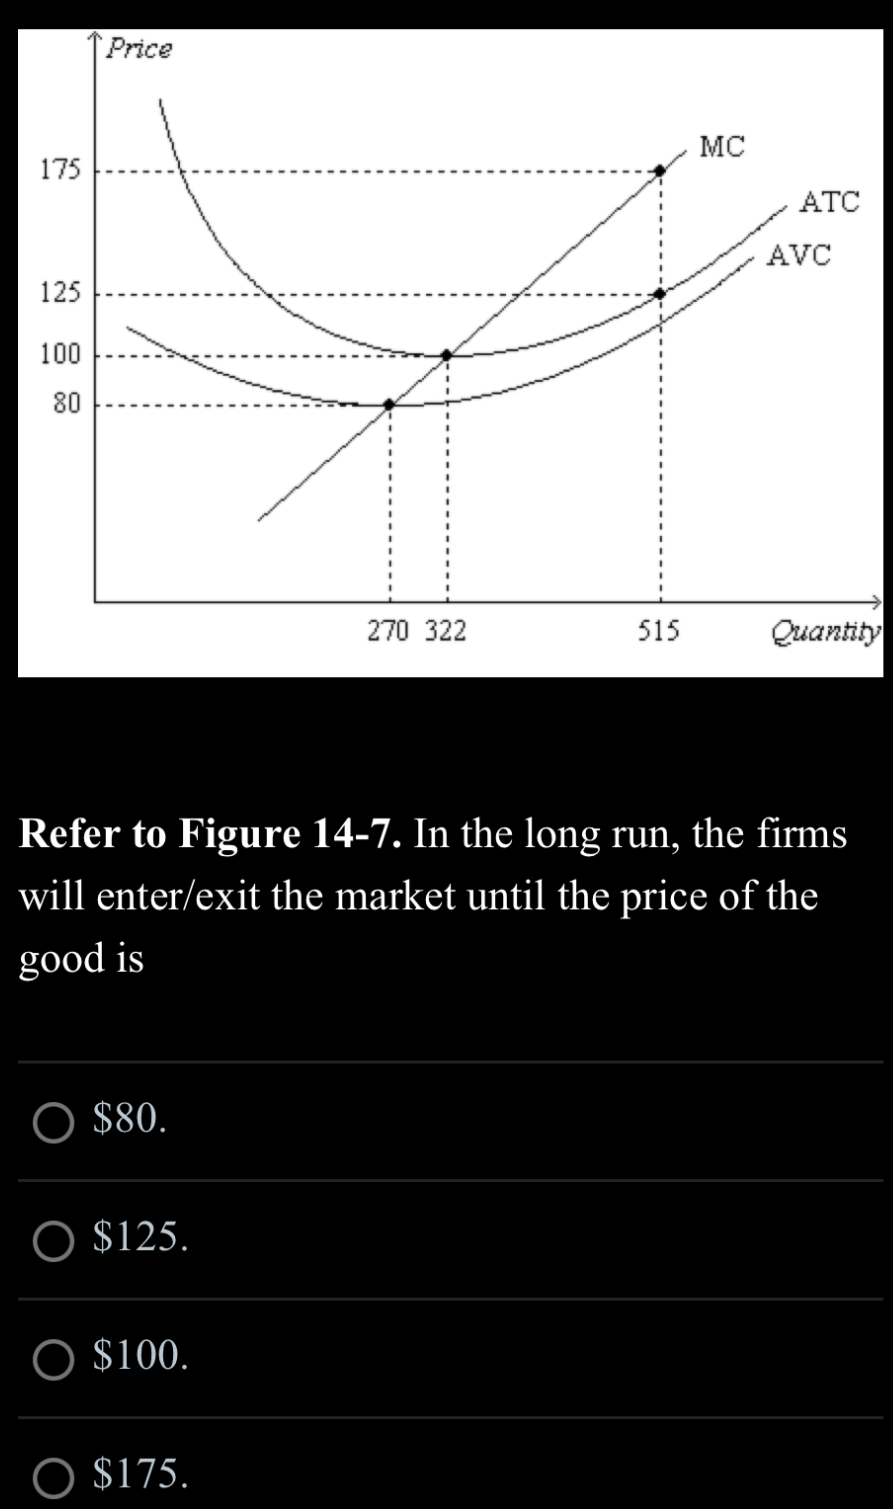 175
23
125
100
80
Price
MC
ATC
AVC
270 322
515
Quantity
Refer to Figure 14-7. In the long run, the firms
will enter/exit the market until the price of the
good is
$80.
$125.
$100.
O $175.